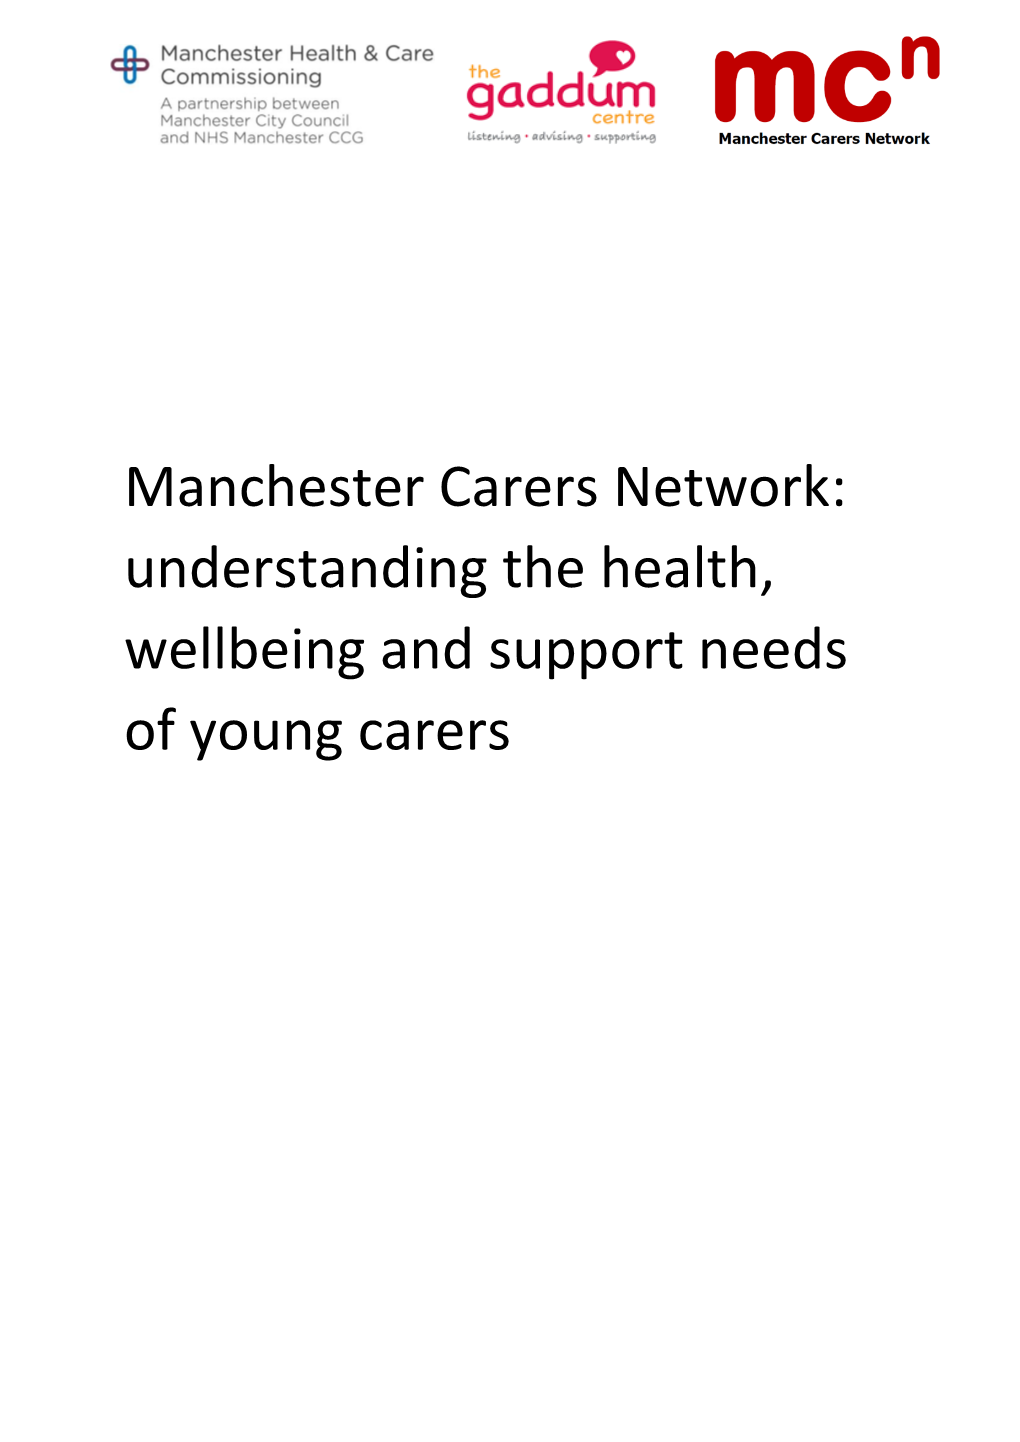 Understanding Health and Wellbeing Needs of Young Carers